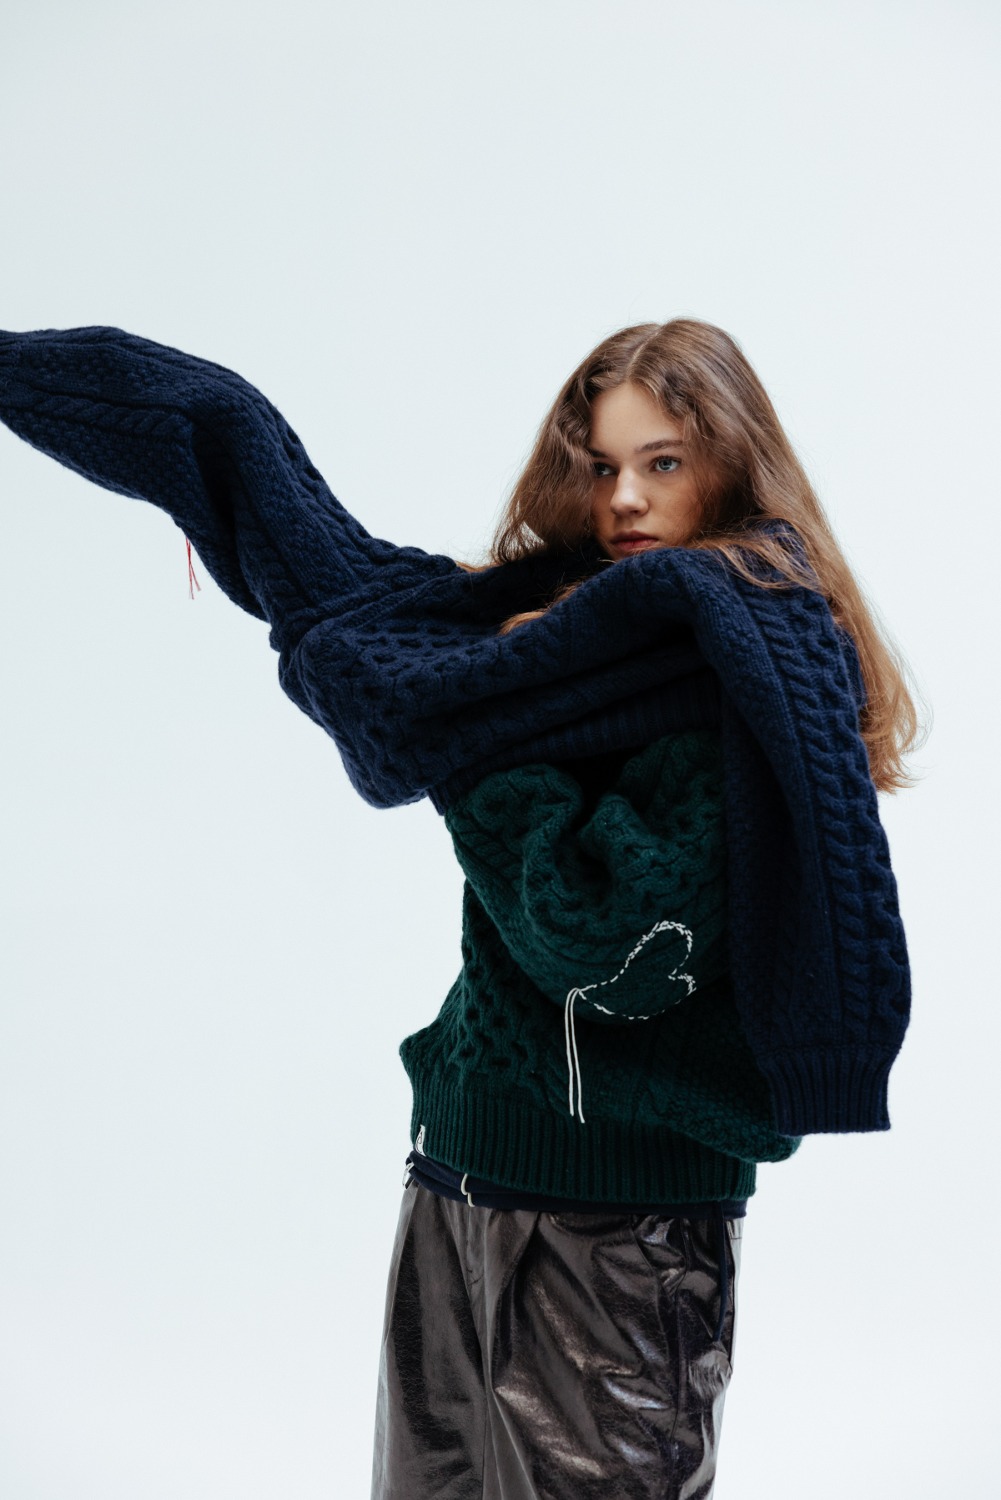 Mused Handmade Heart Cable Knit Pullover - Navy